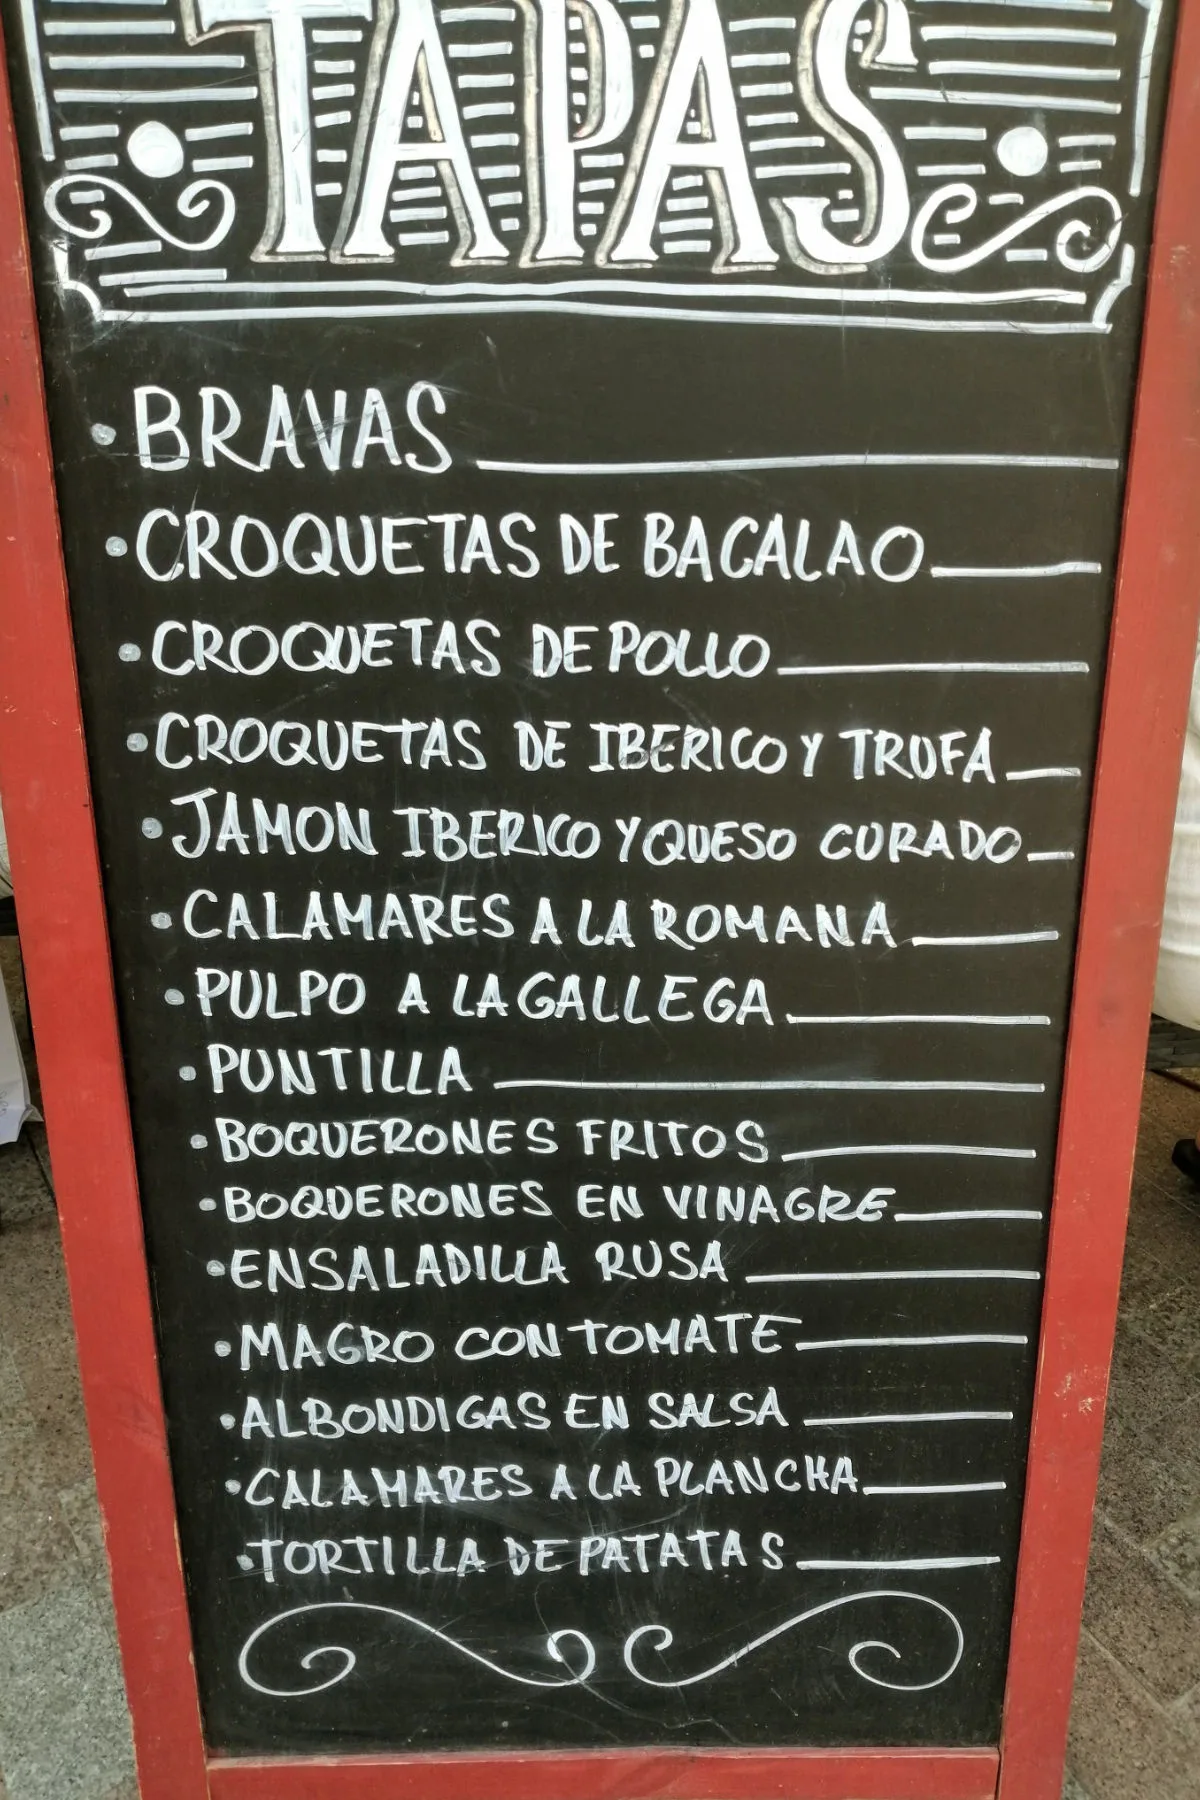 A restaurant sign advertising various tapas dishes